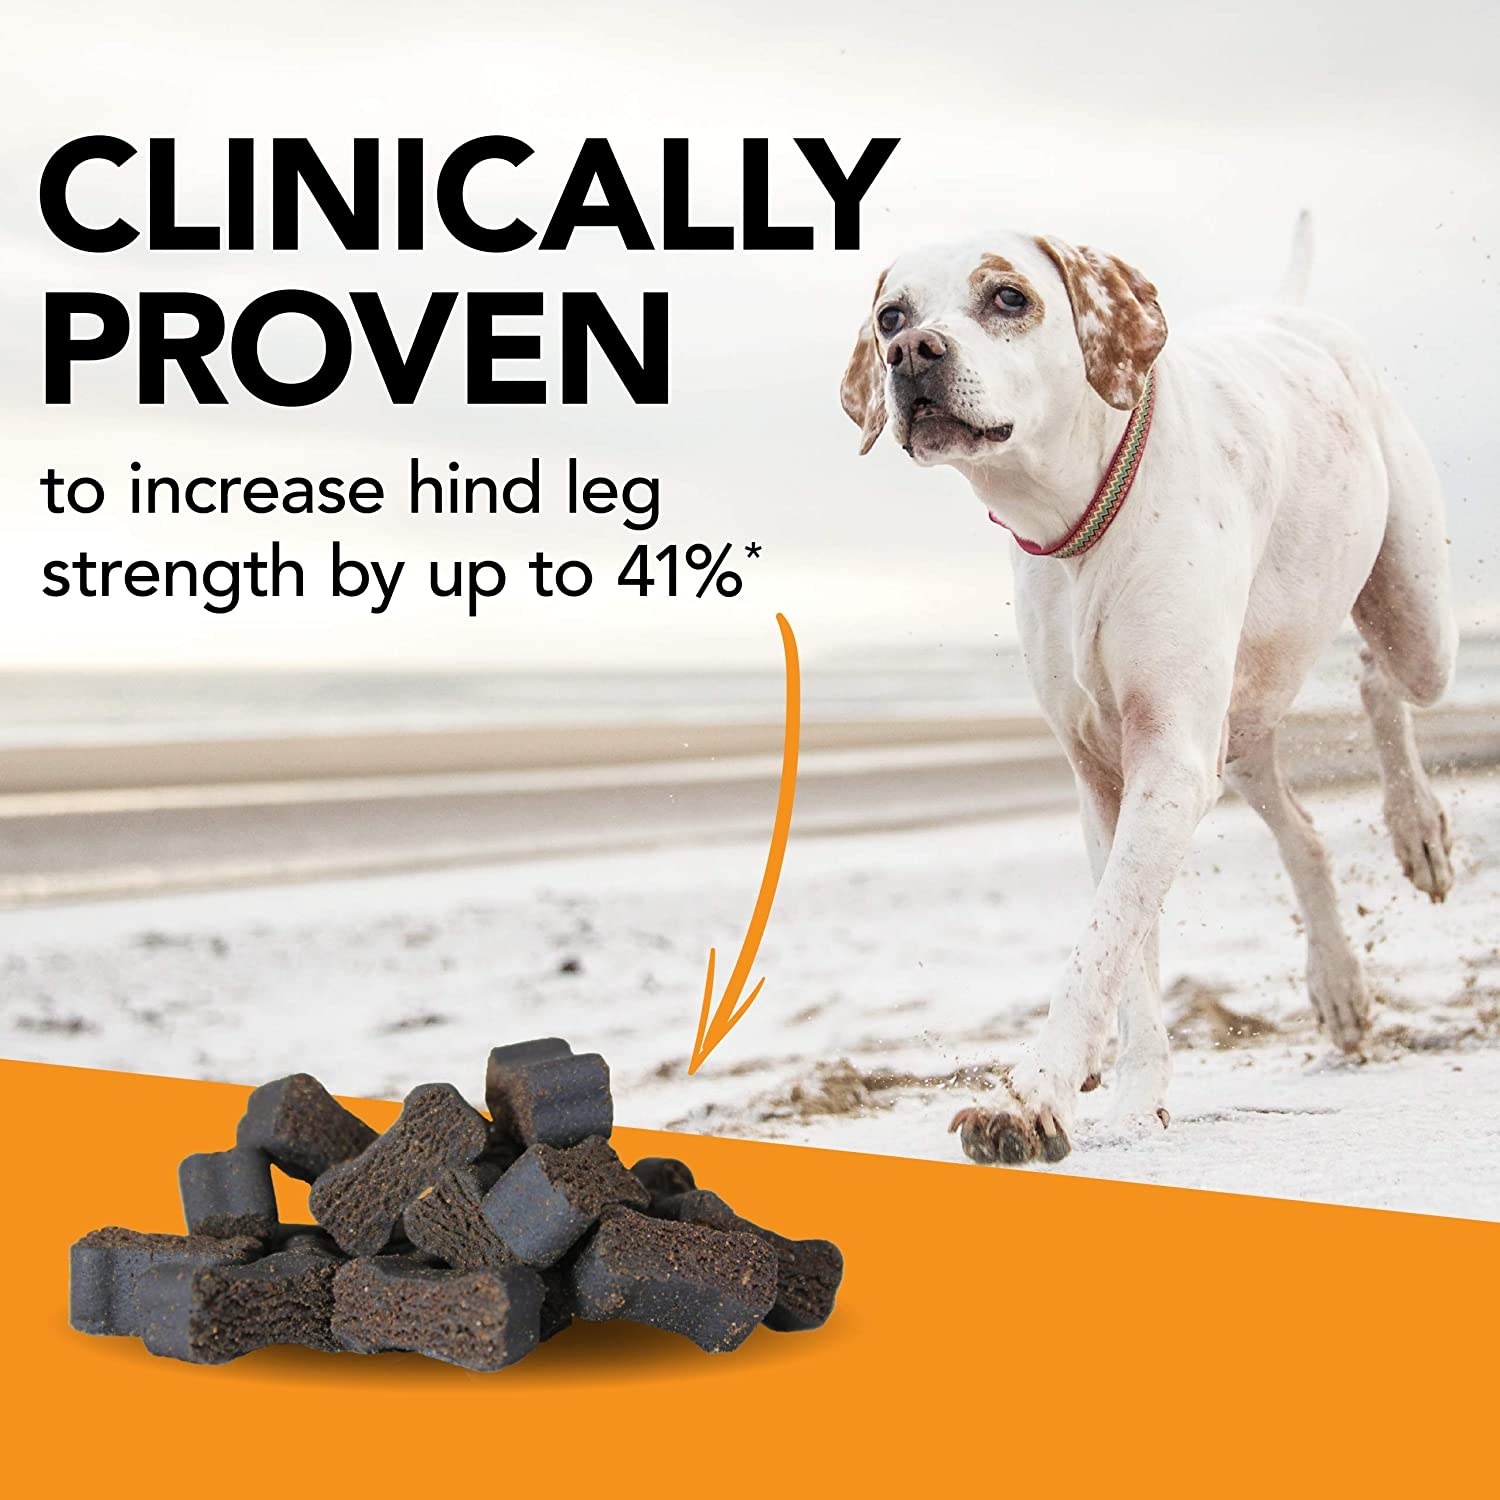 Infographic that shows the treats and says they&#x27;re proven to increase hind leg strength by up to 41%